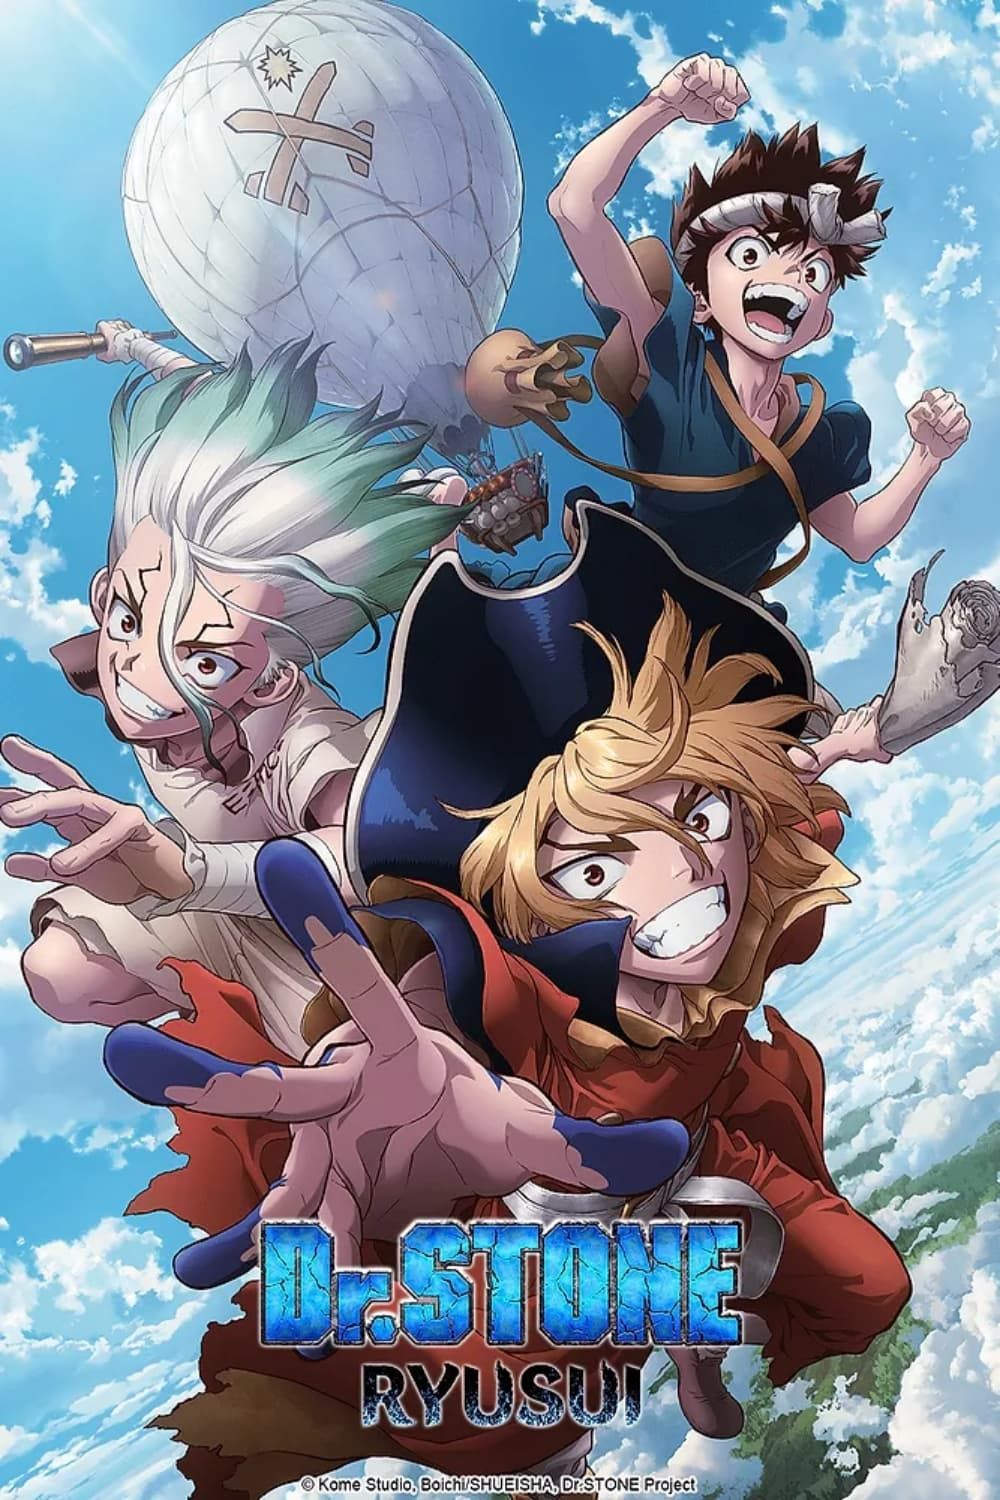 Watch Dr. Stone